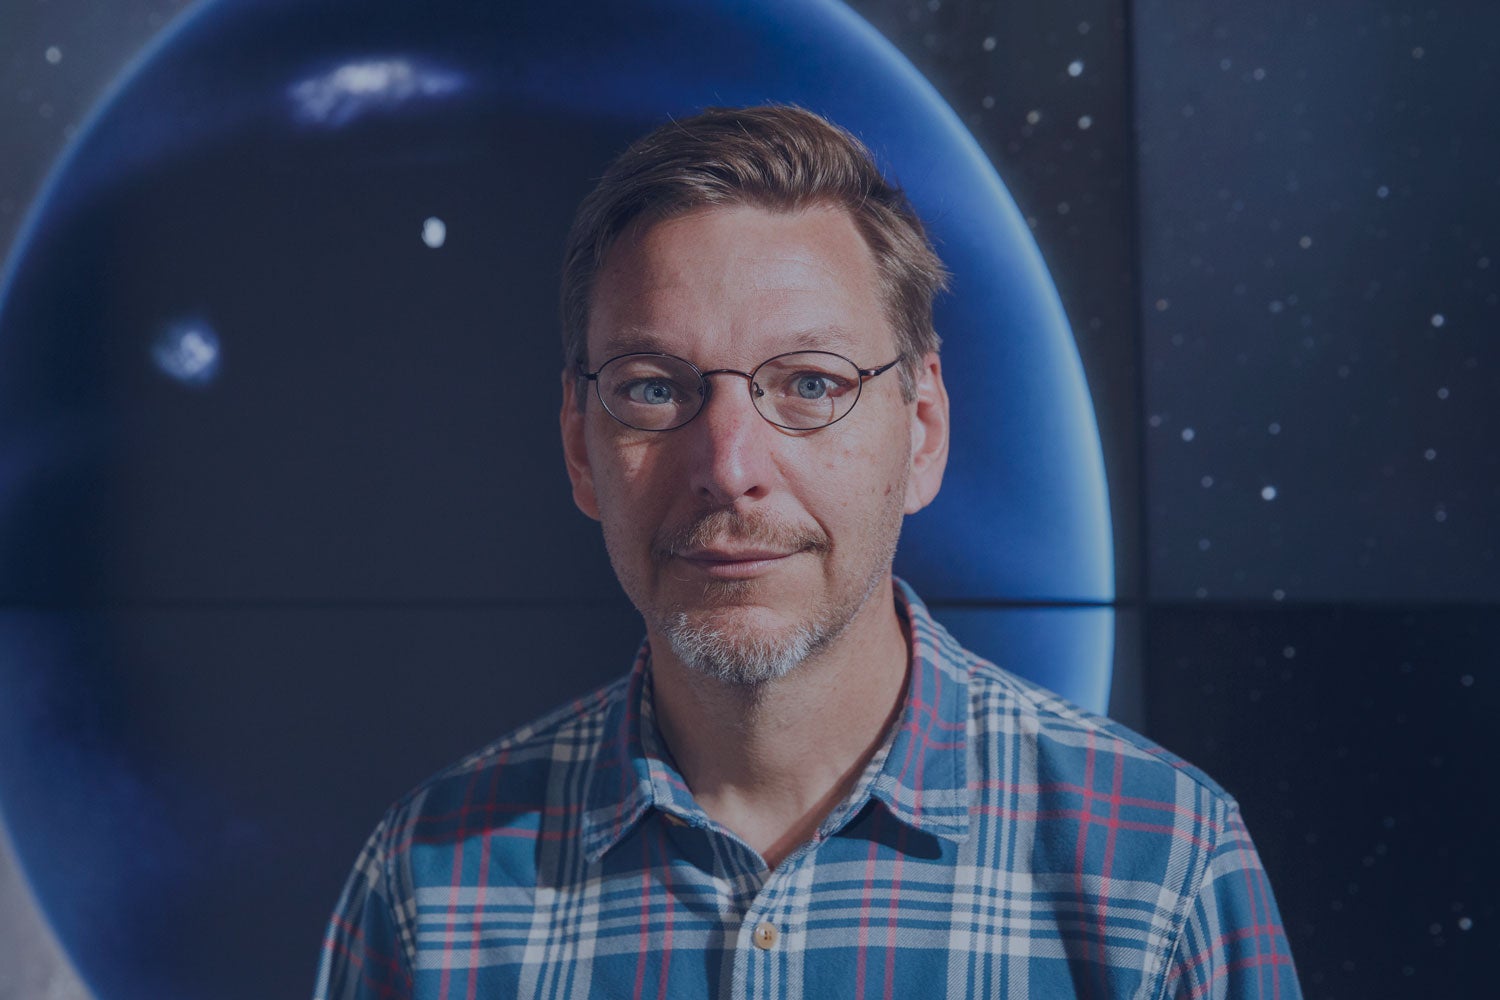 Mike Brown, Professor of Planetary Astronomy